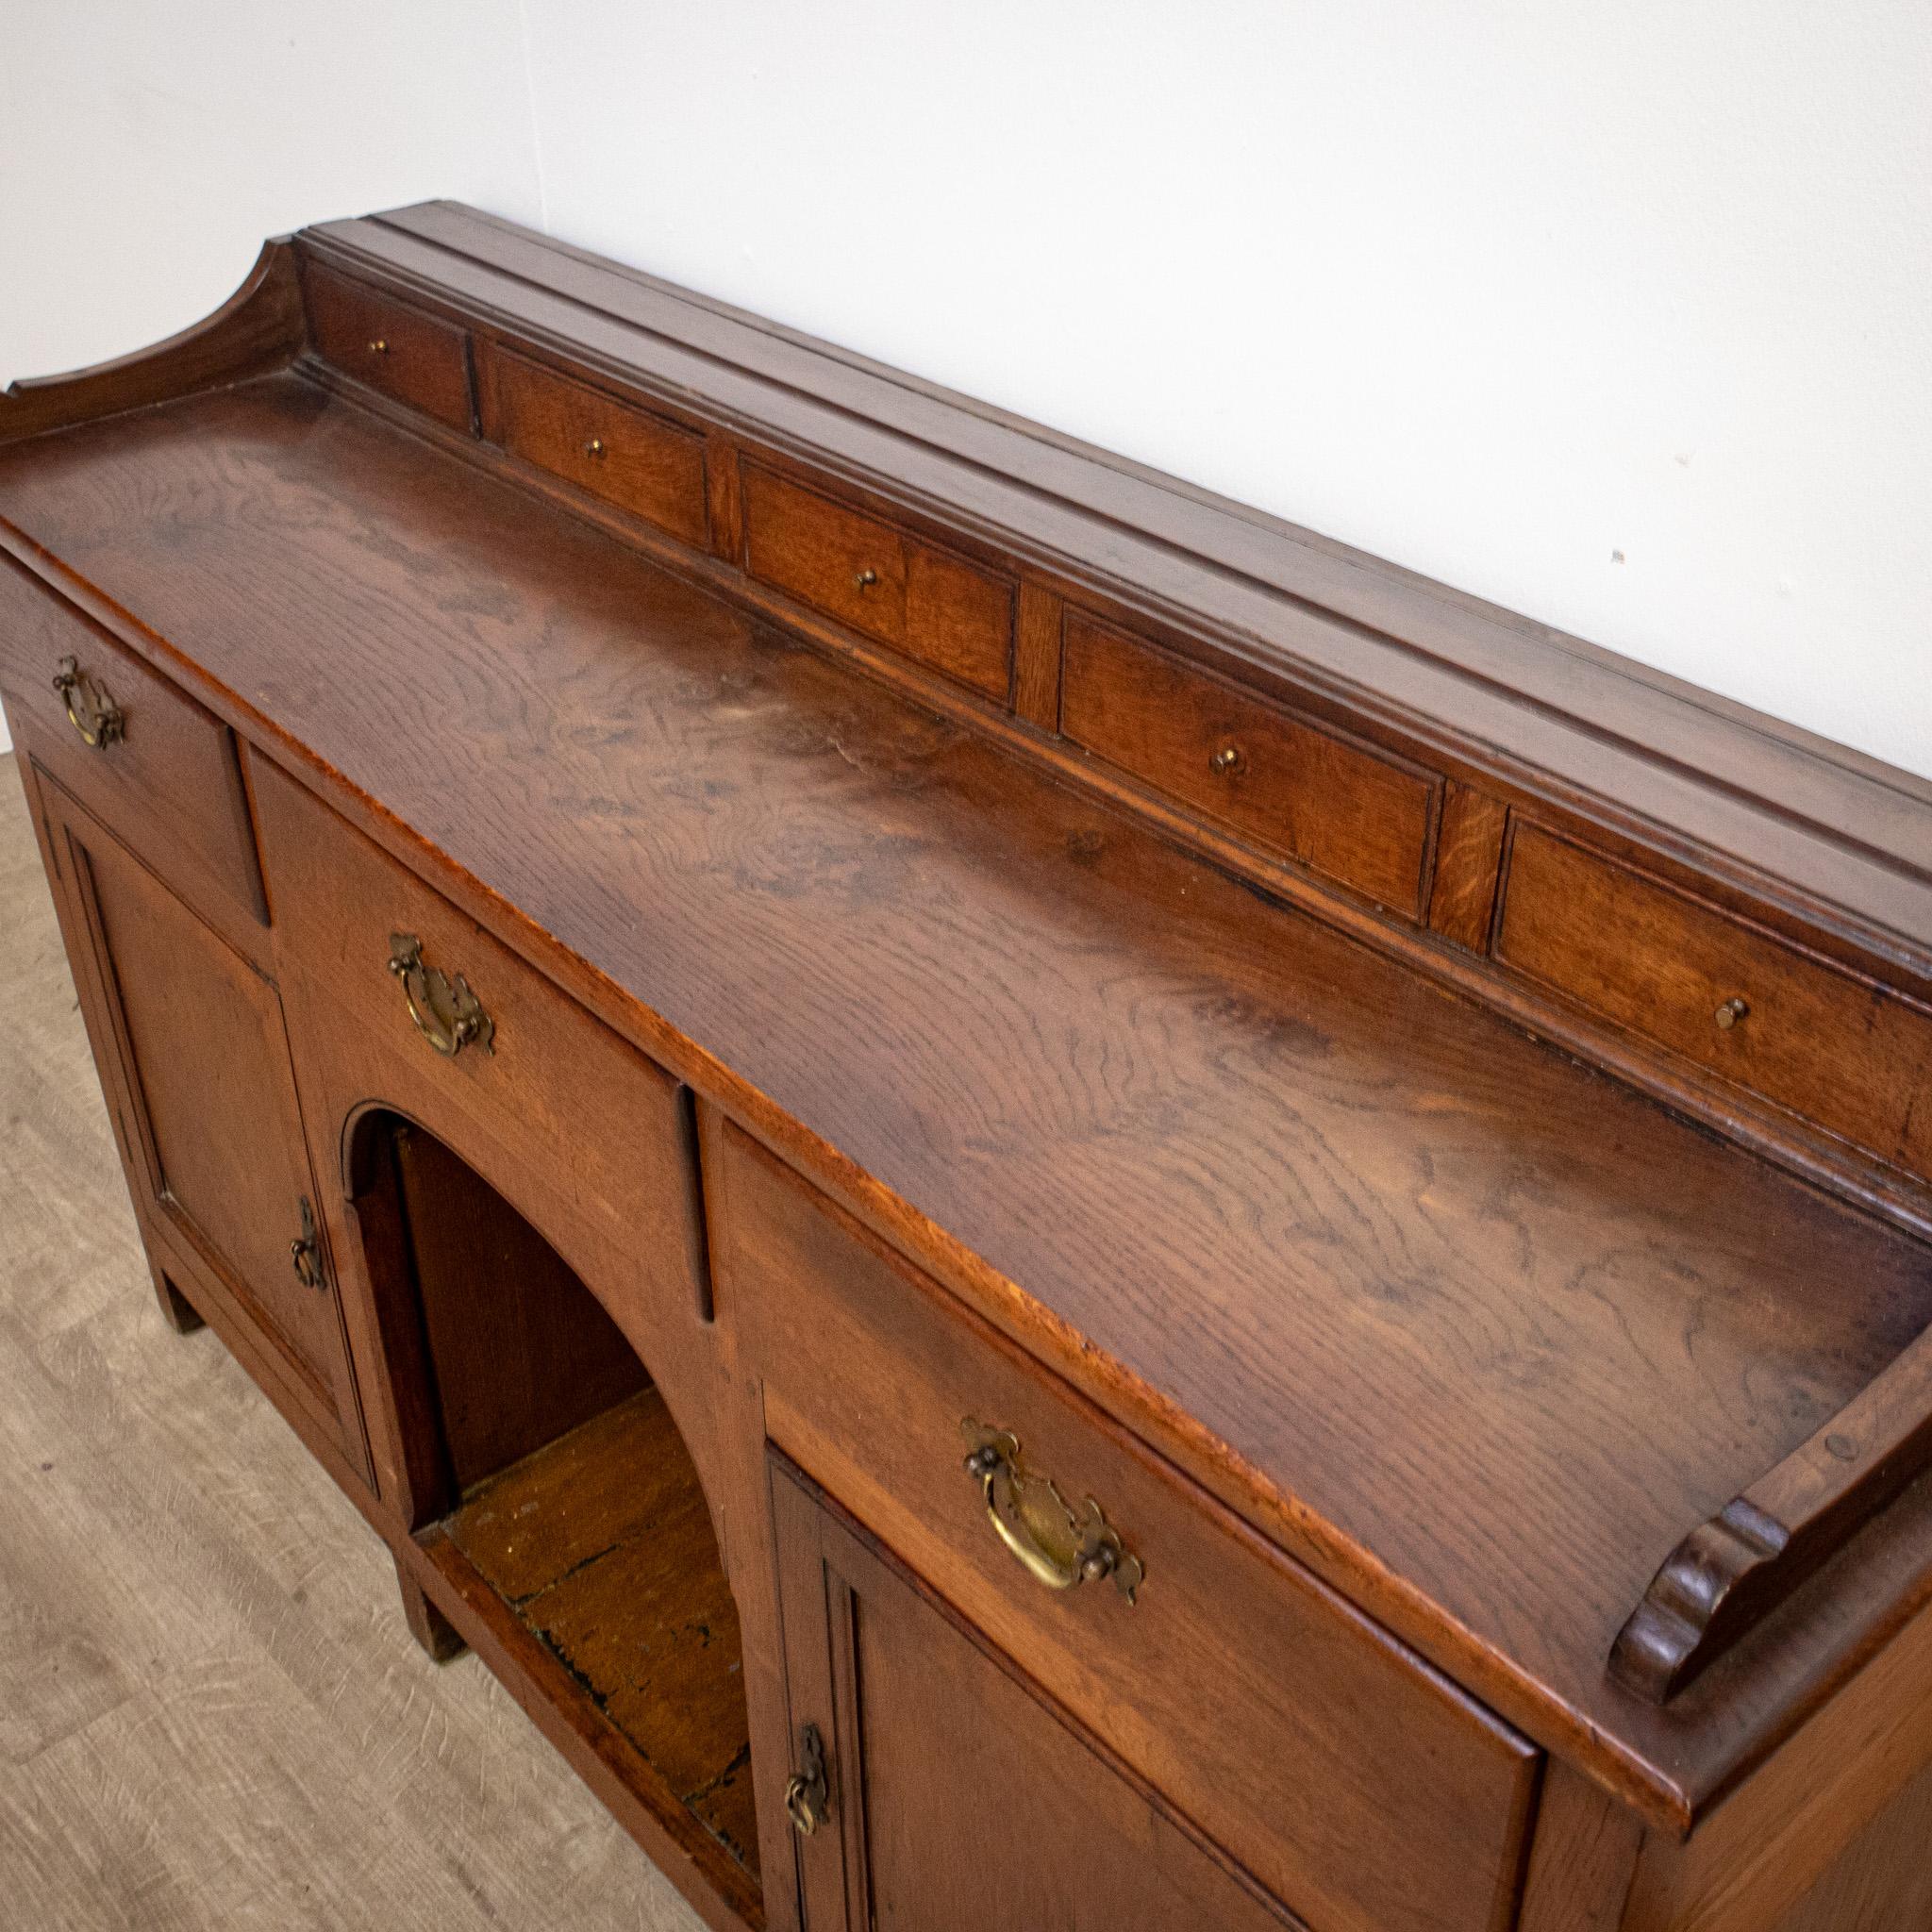 A delightful embodiment of antique charm and practicality, this small early 19th century Welsh dresser captures the enduring essence of traditional countryside aesthetics. Its upper section features a cornice and three shelves, each thoughtfully